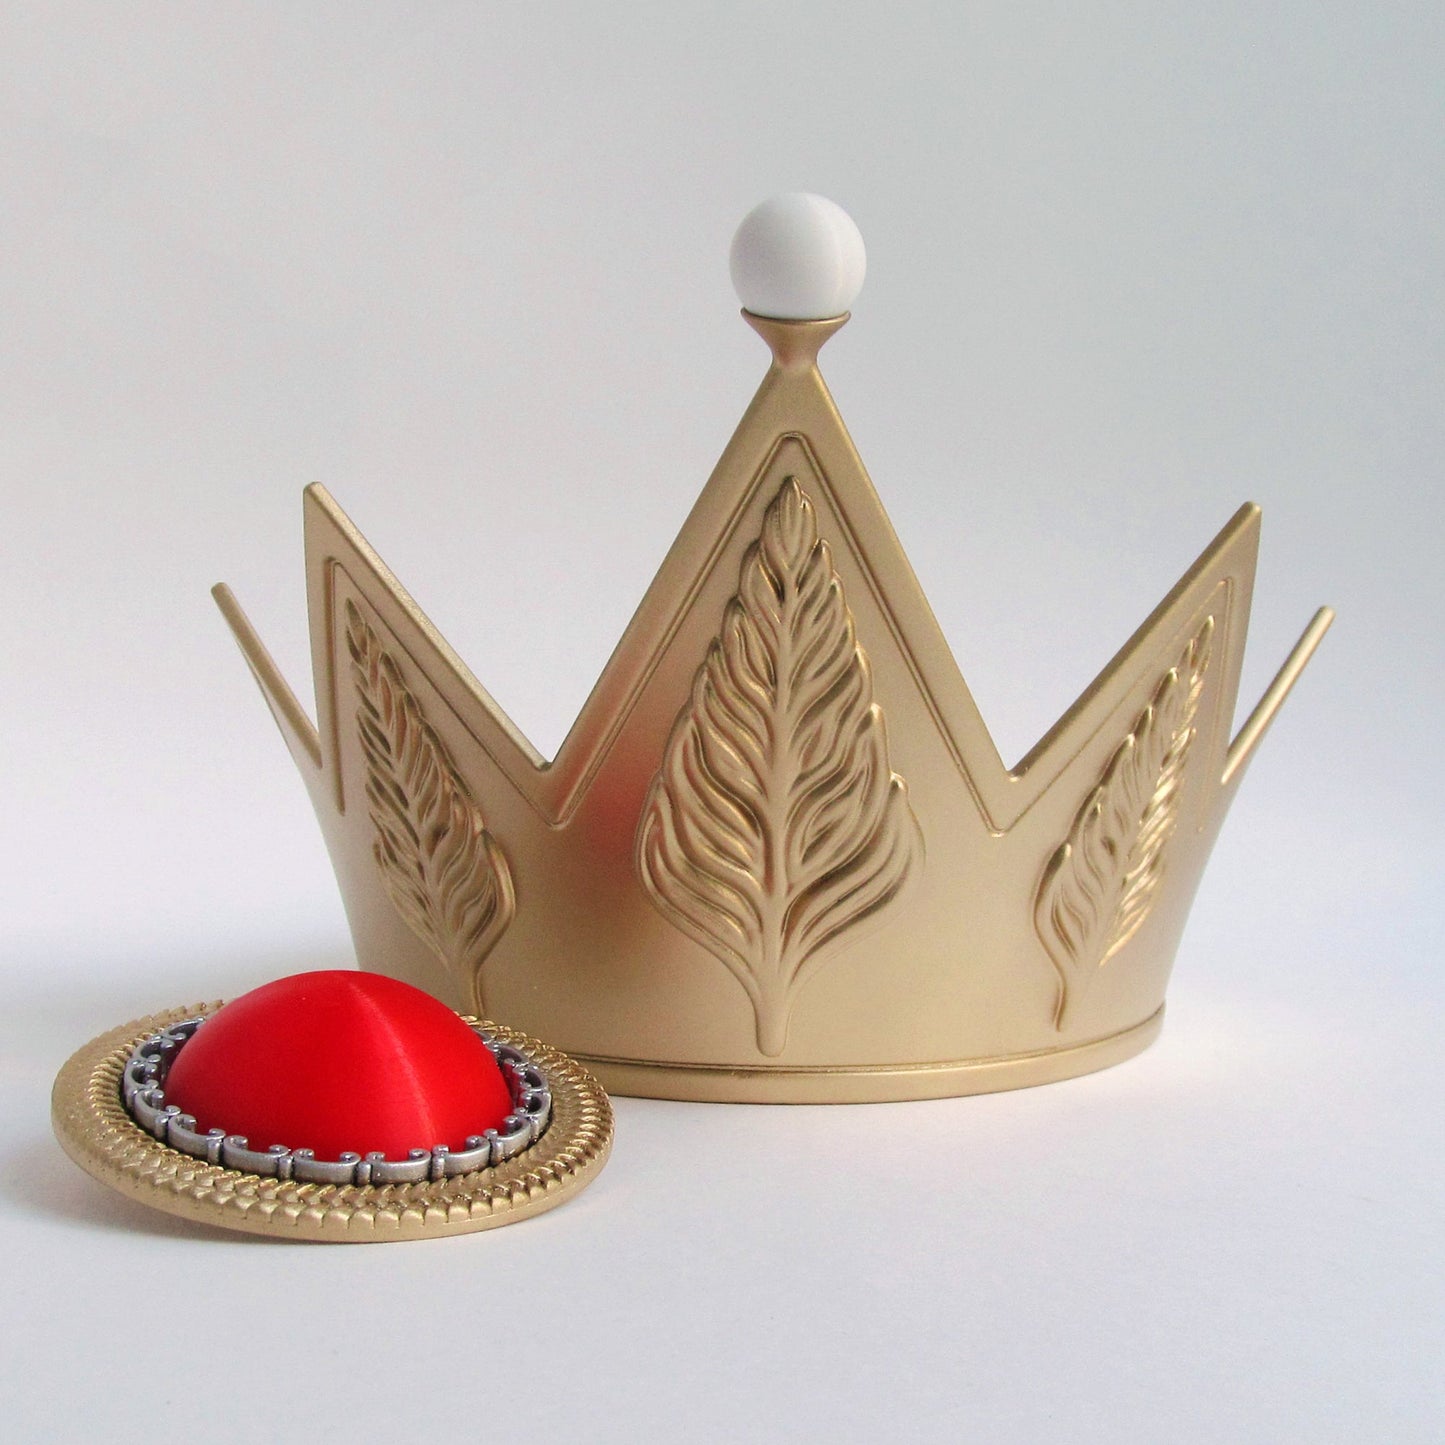 Evil Queen accessories: Crown and Brooch